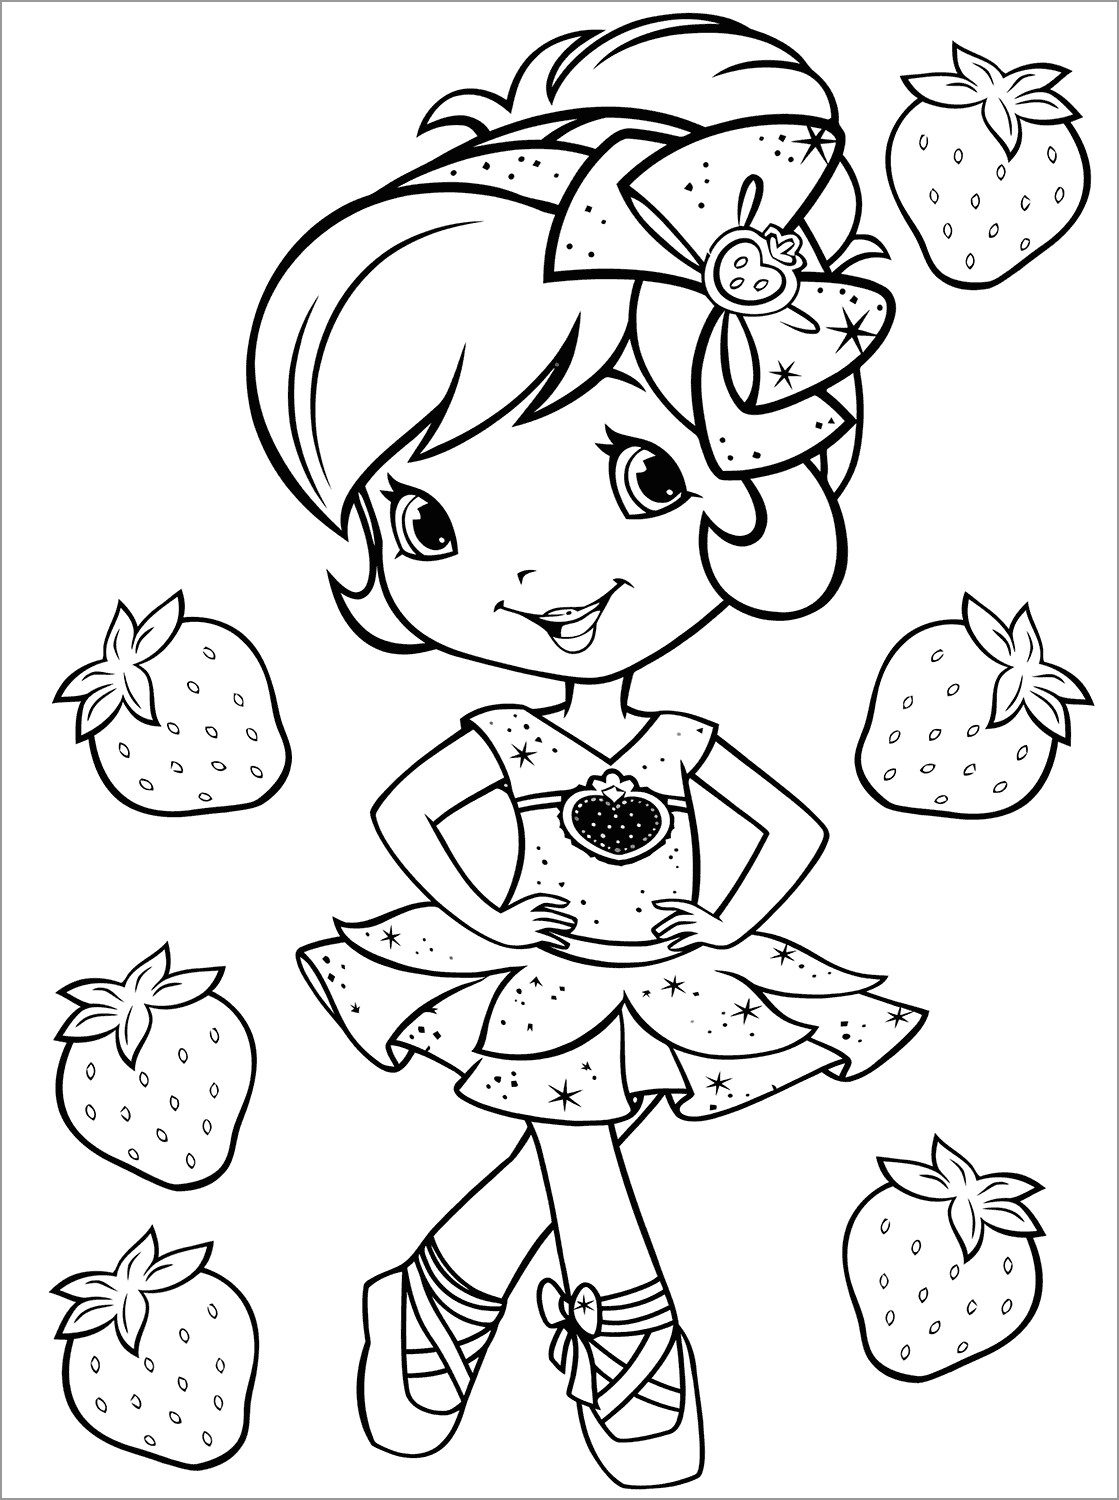 Strawberry Shortcake Coloring Pages - ColoringBay